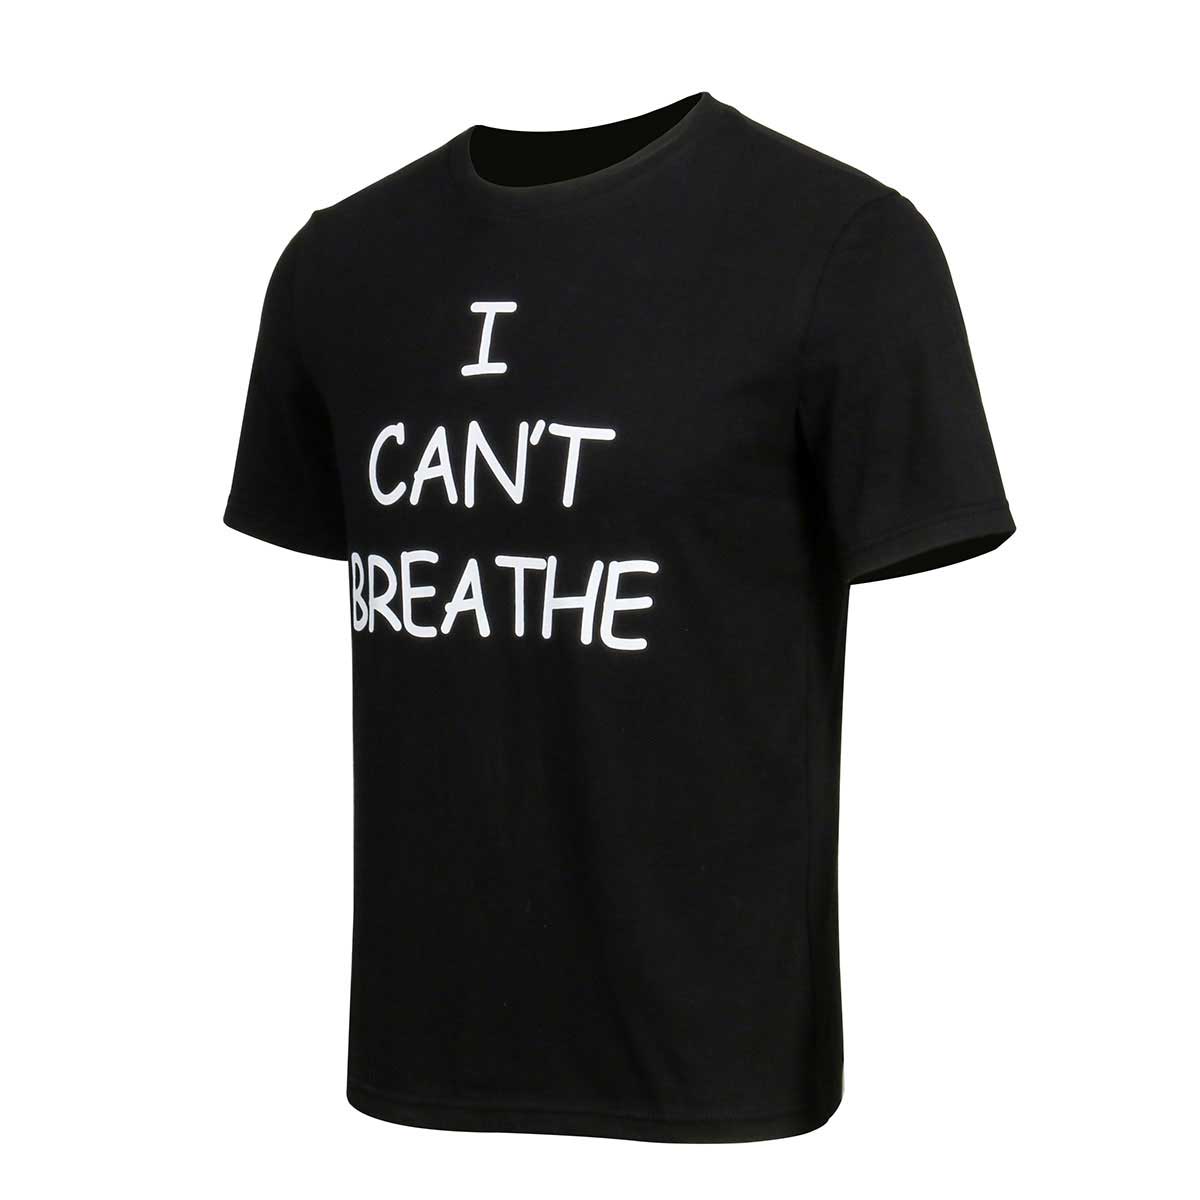 I can't breathe Black T-shirt Protest Tee